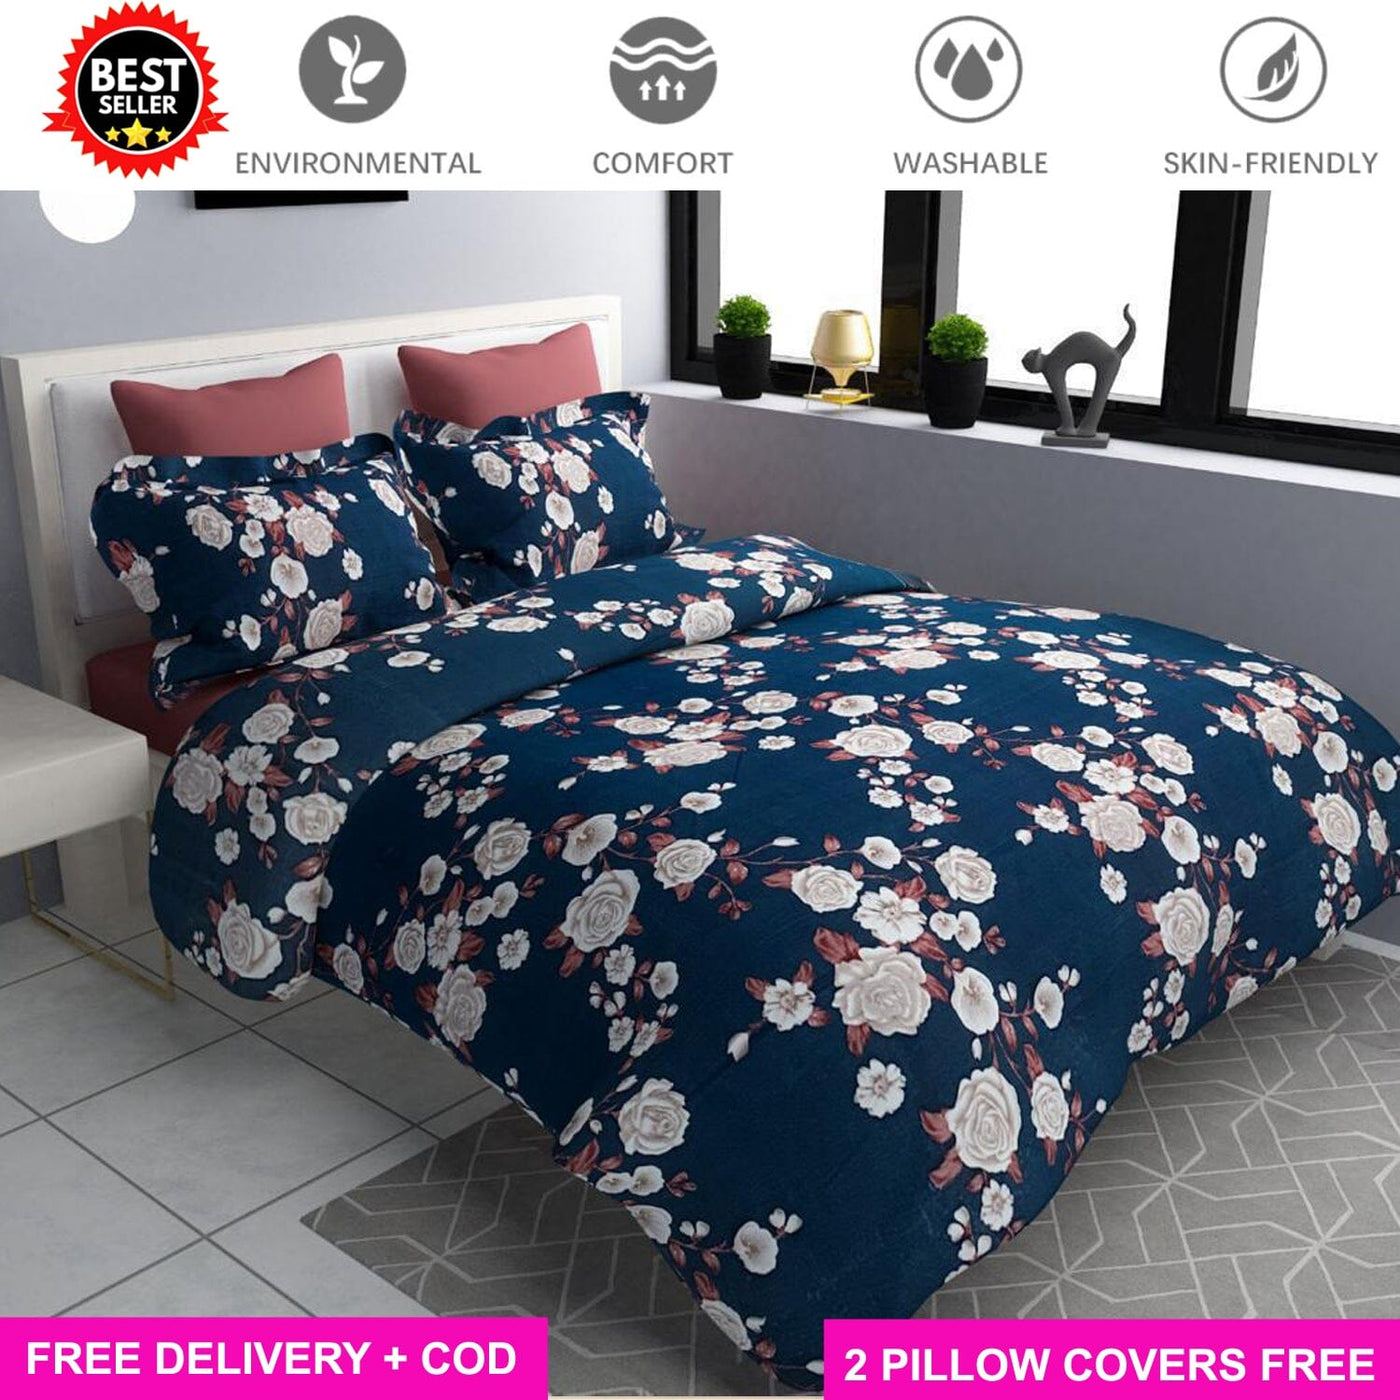 Night Rose Flower Full Elastic Fitted Bedsheet with 2 Pillow Covers - King Size Bed Sheets Great Happy IN 